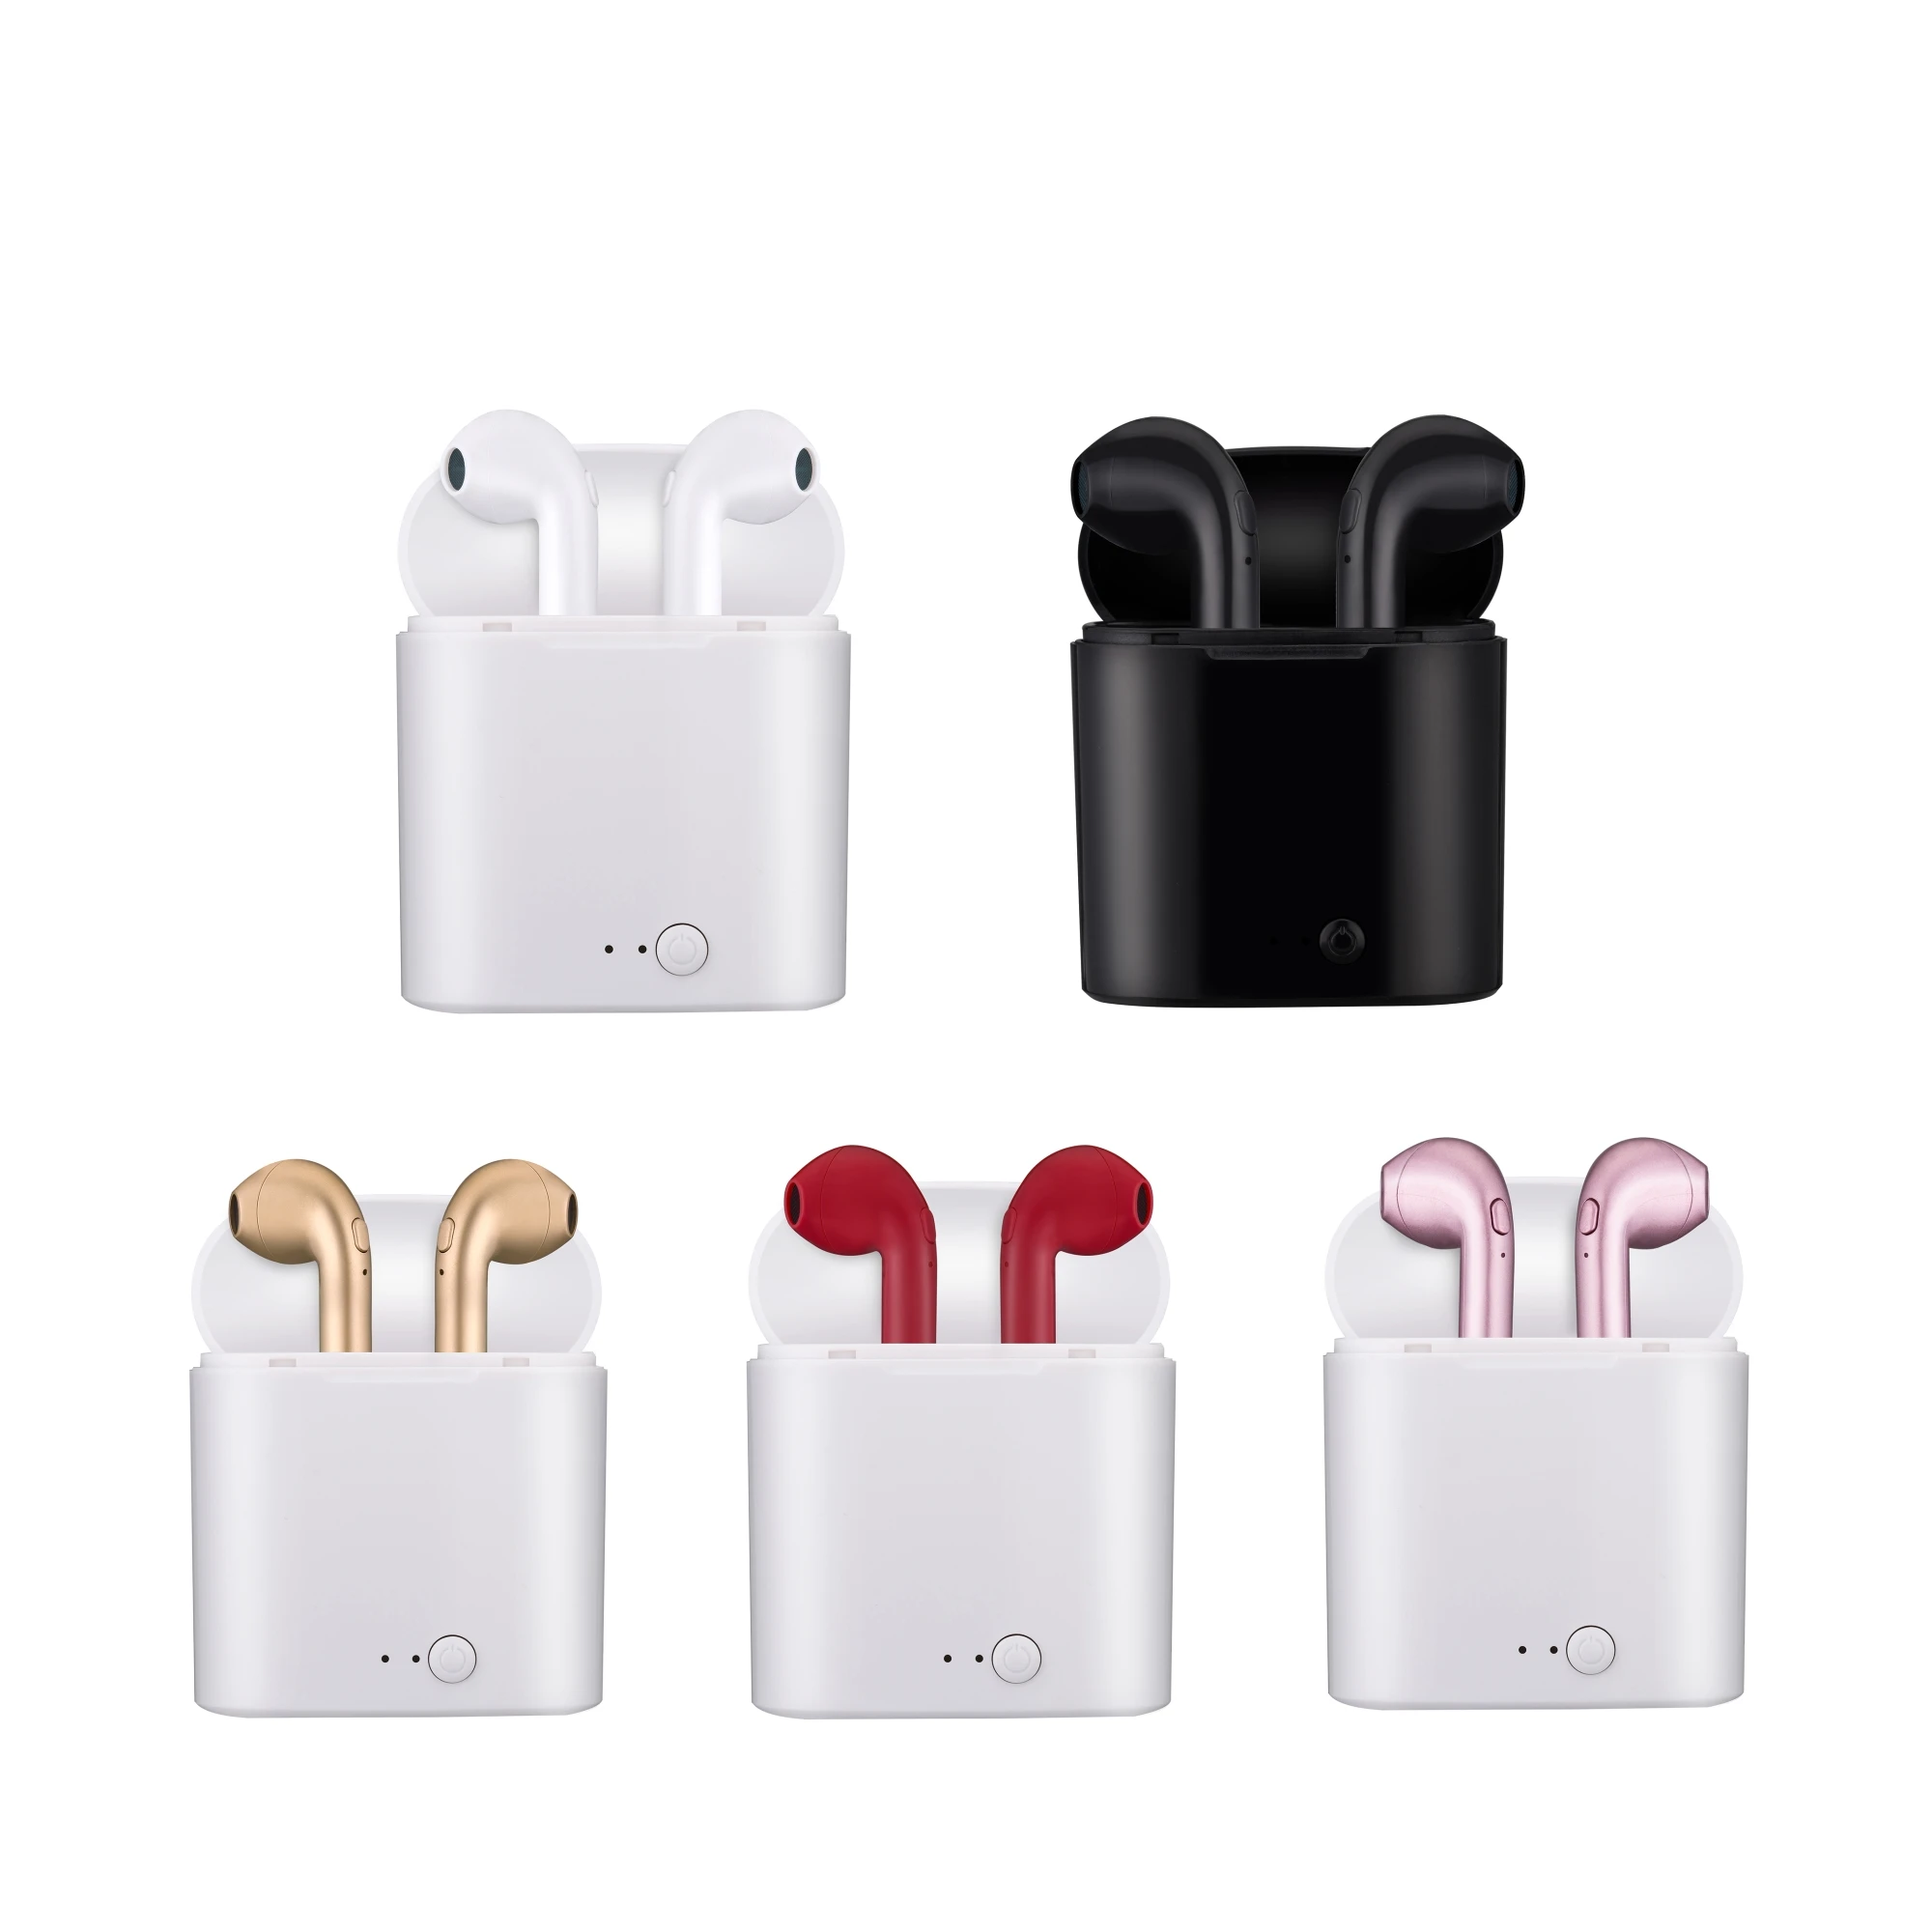 Hot Selling Earphone Headphone Hand Free Wireless bluetooth Earphone Earbuds TWS I7S for iphone android